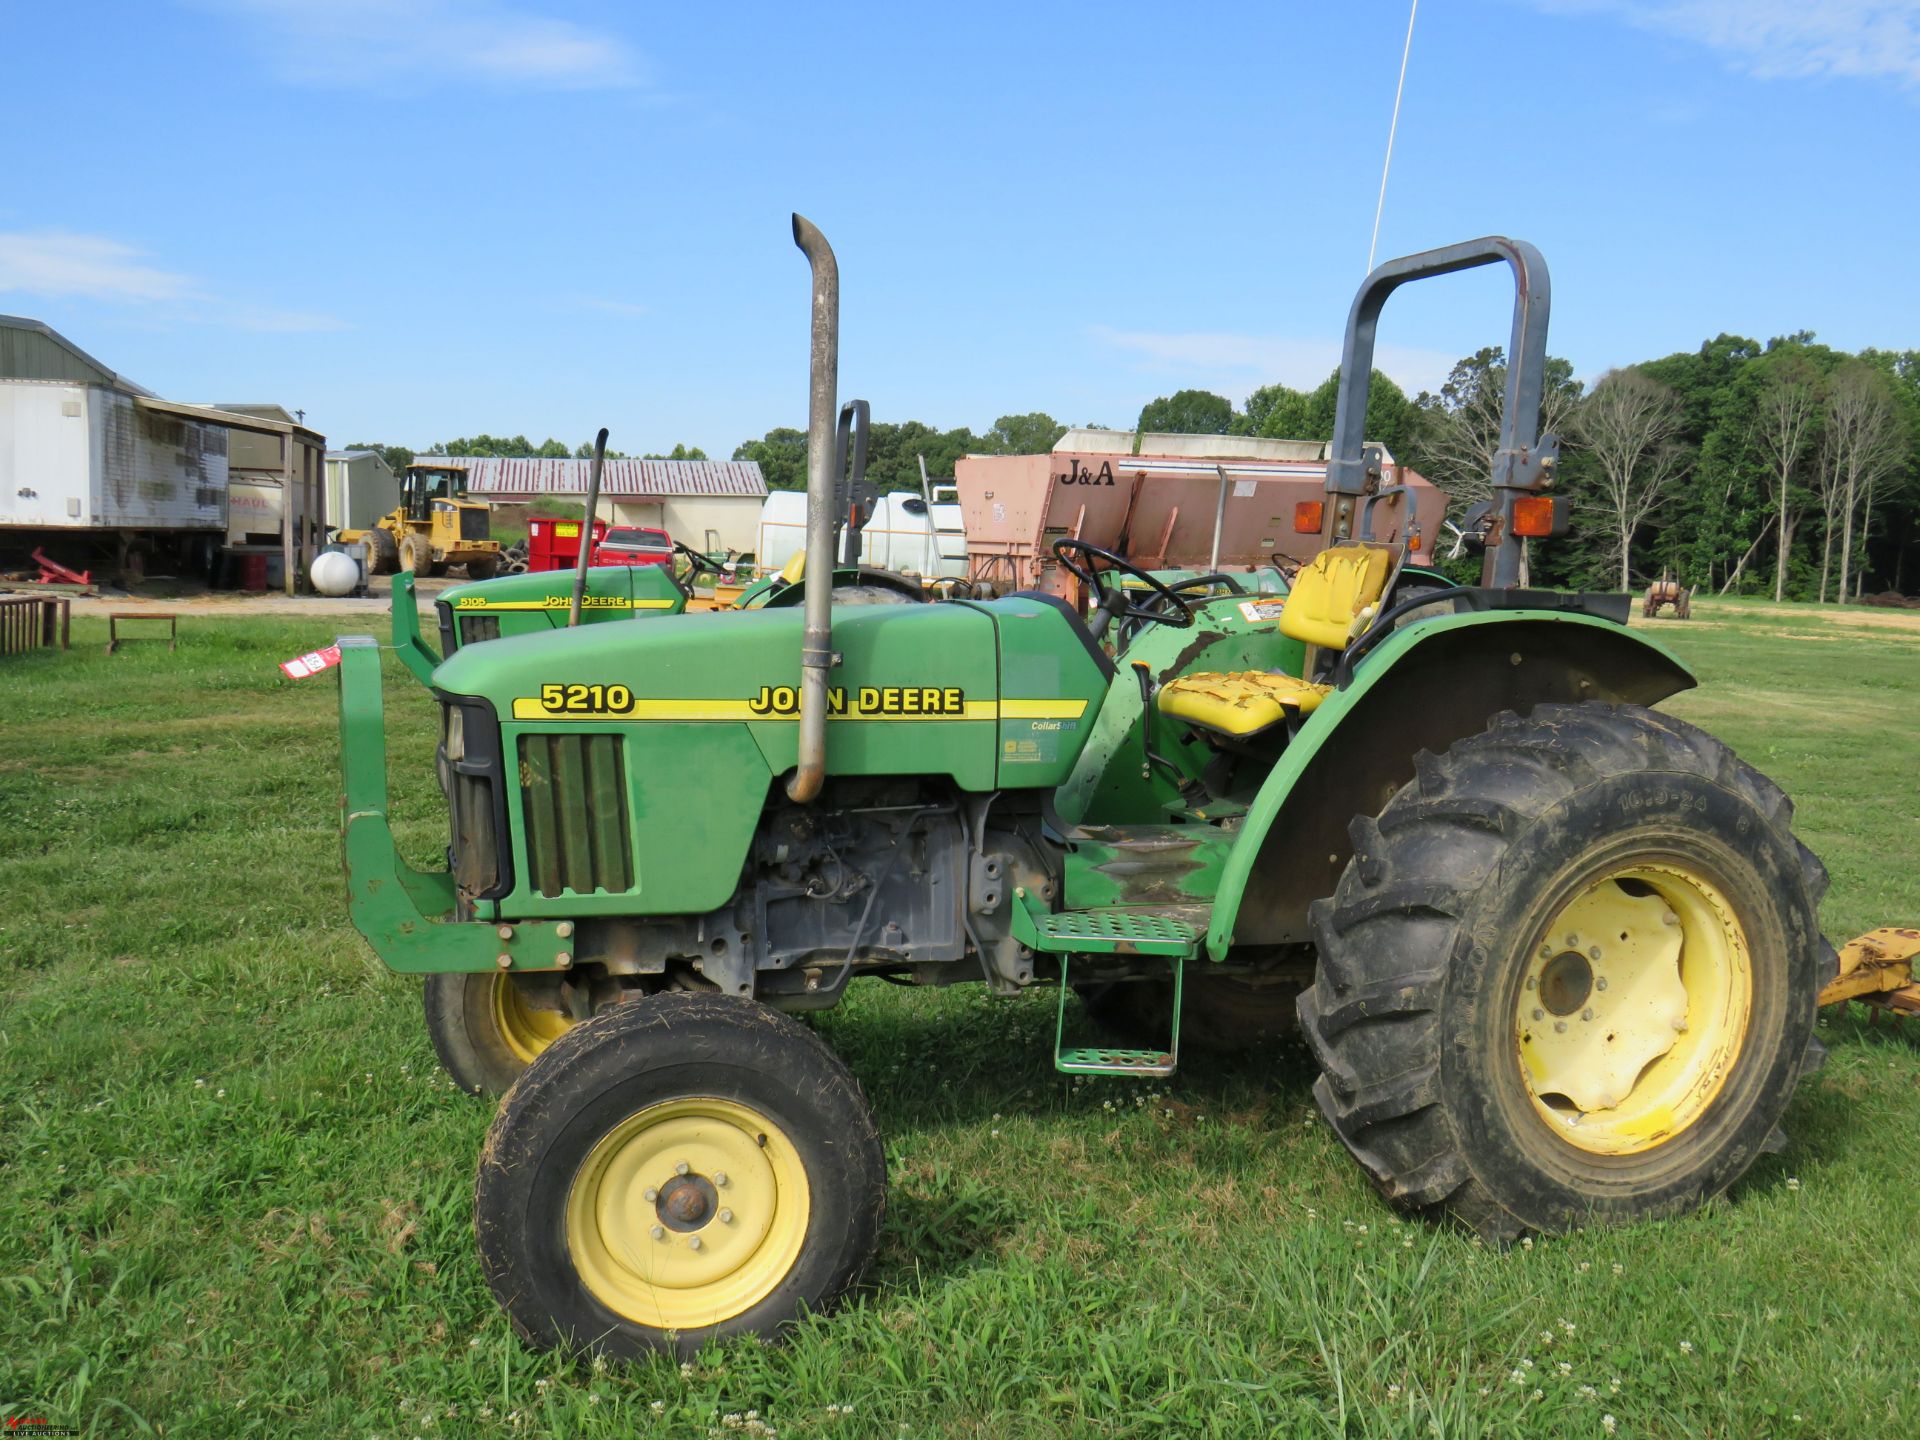 1999 JOHN DEERE 5210 TRACTOR, 3PT, PTO, 16.9-24 REAR TIRES, HOURS NOT AVAILABLE ON THIS UNIT, S/N